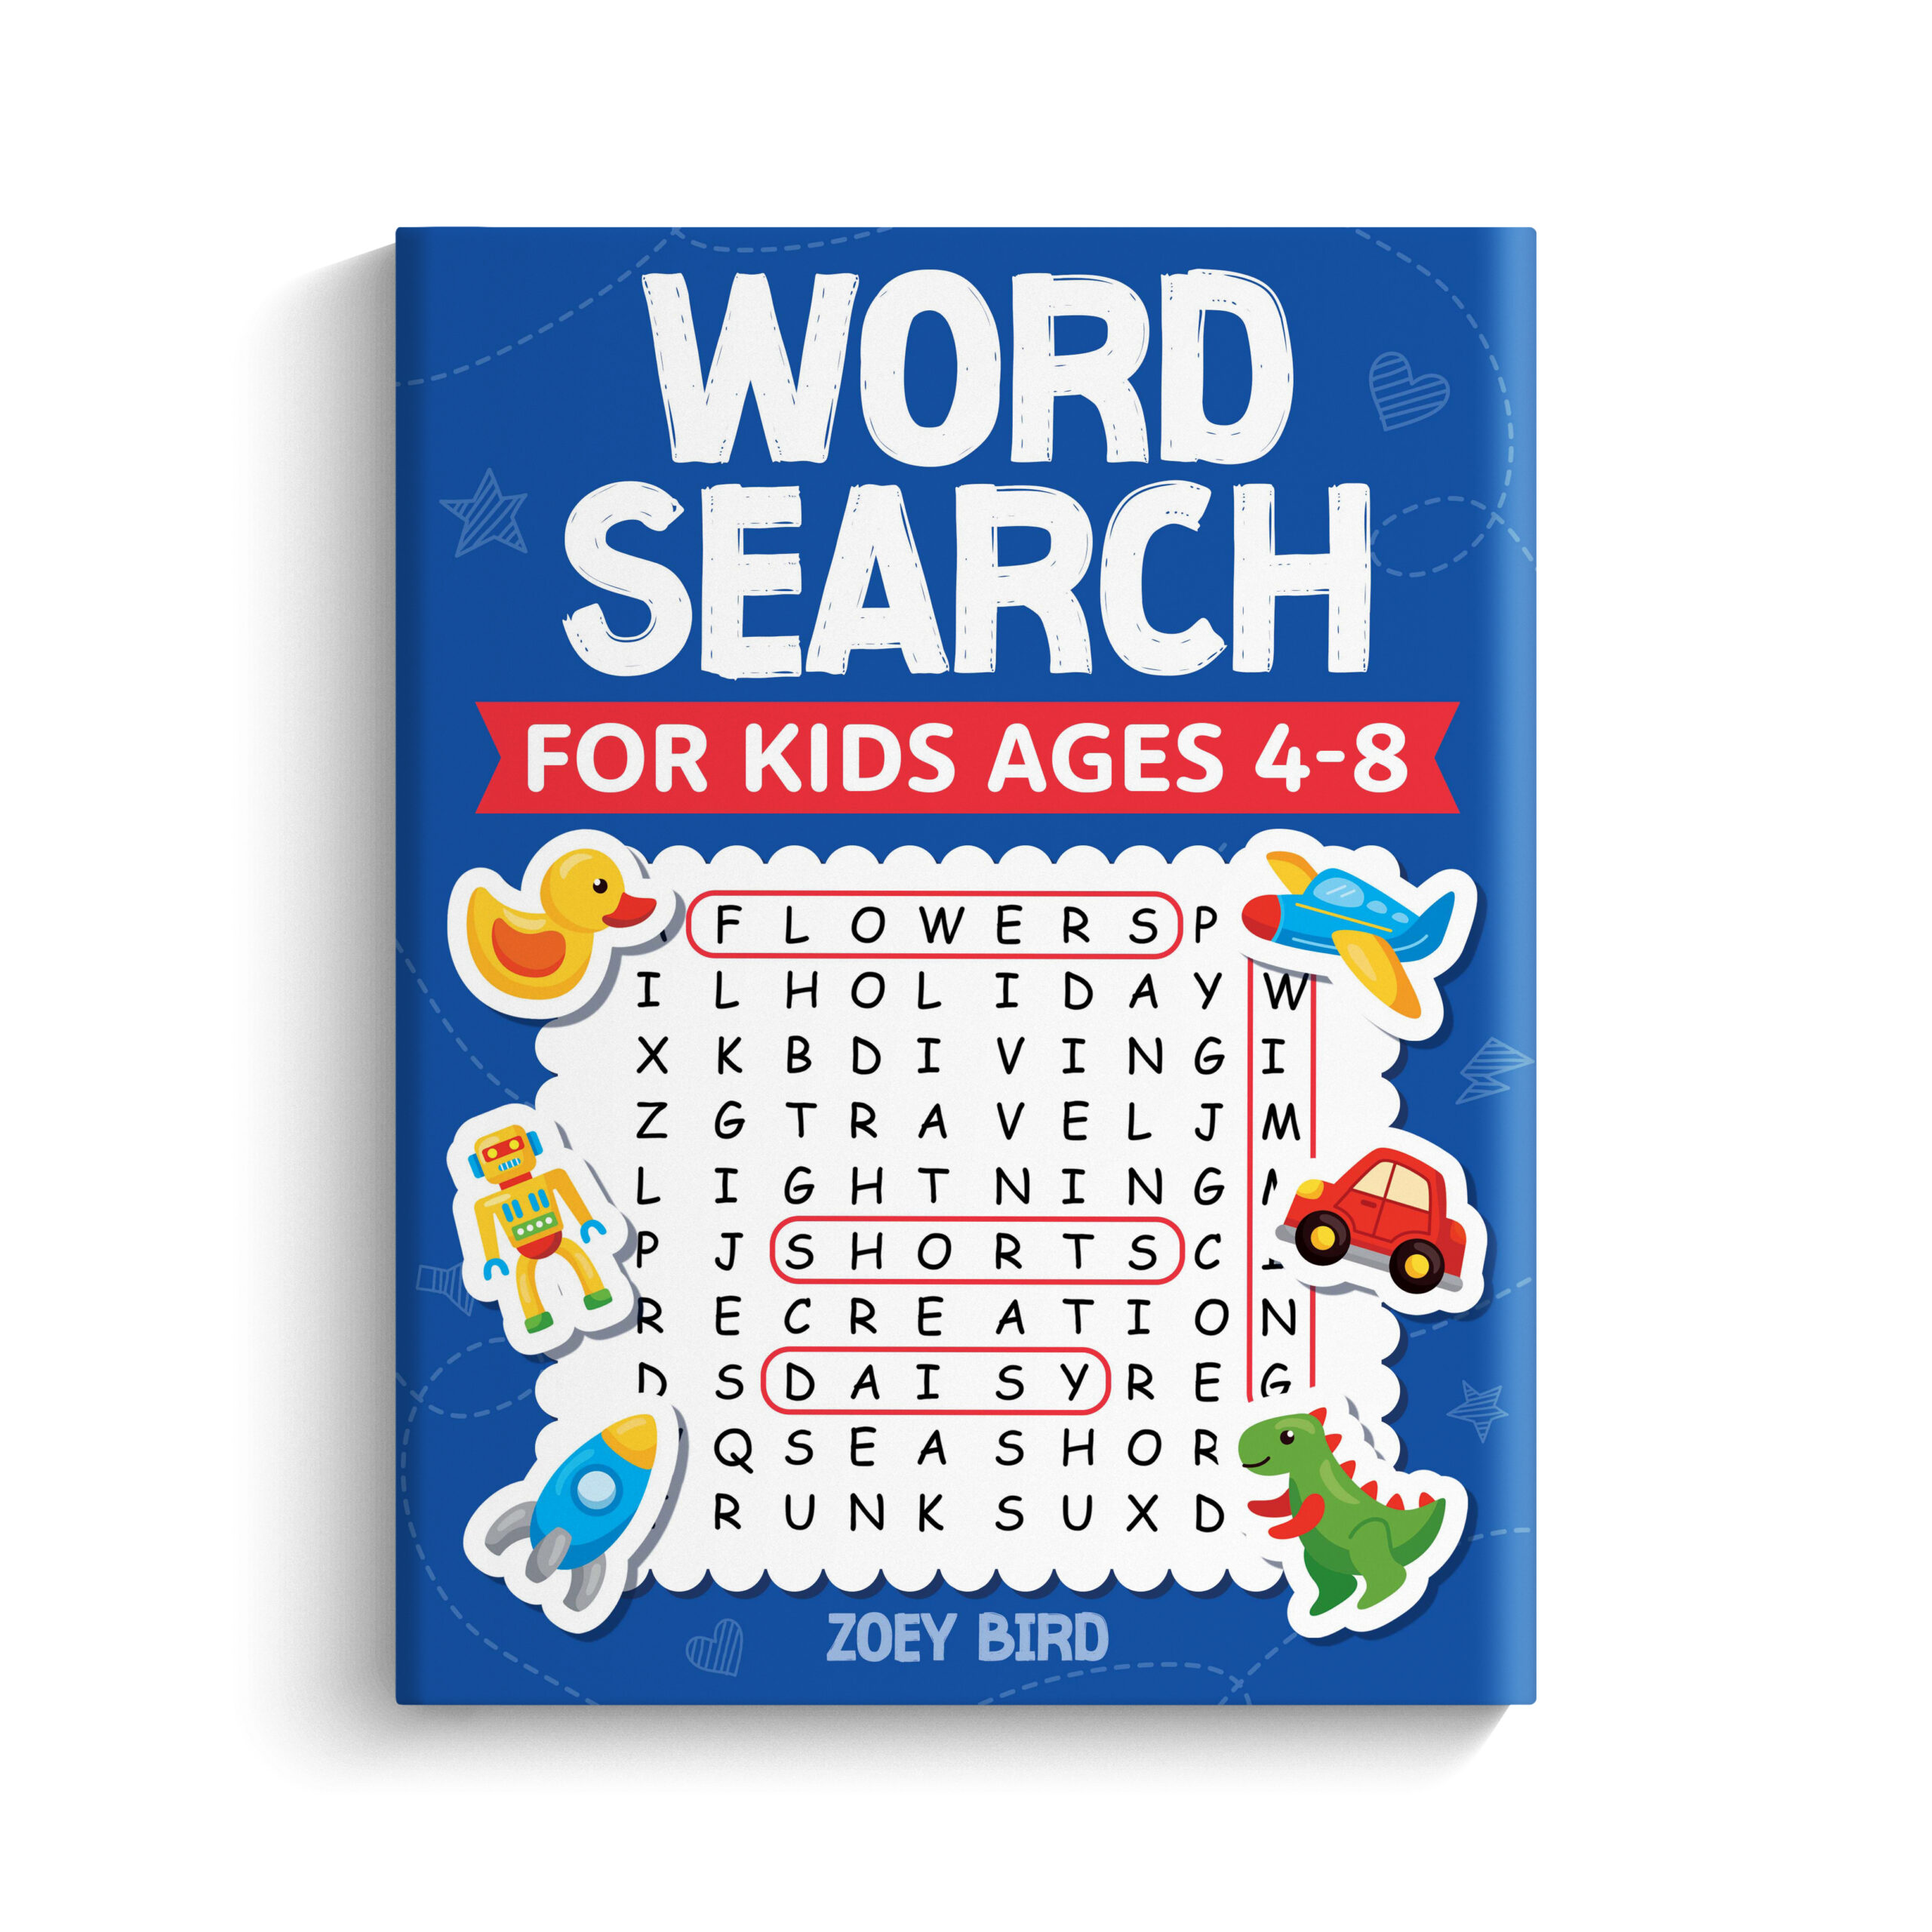 Word Search for Kids by Zoey Bird